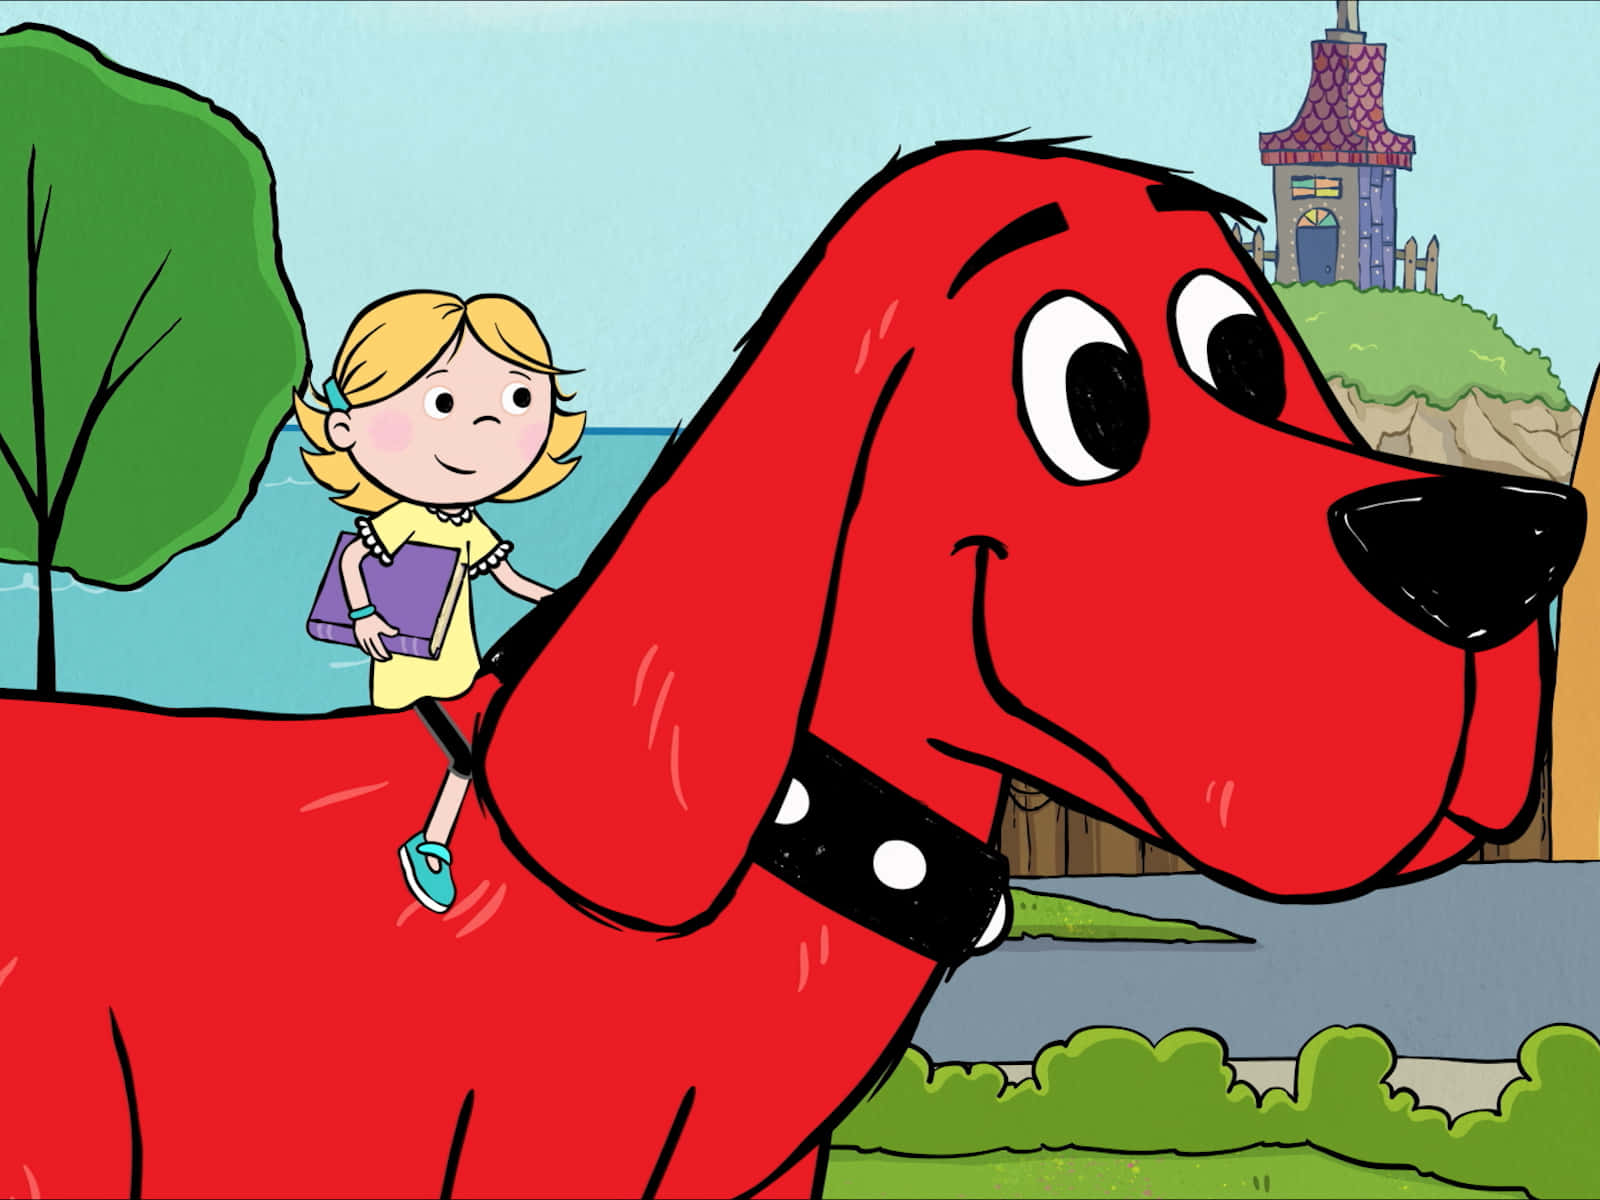 Clifford the Big Red Dog loves his playtime